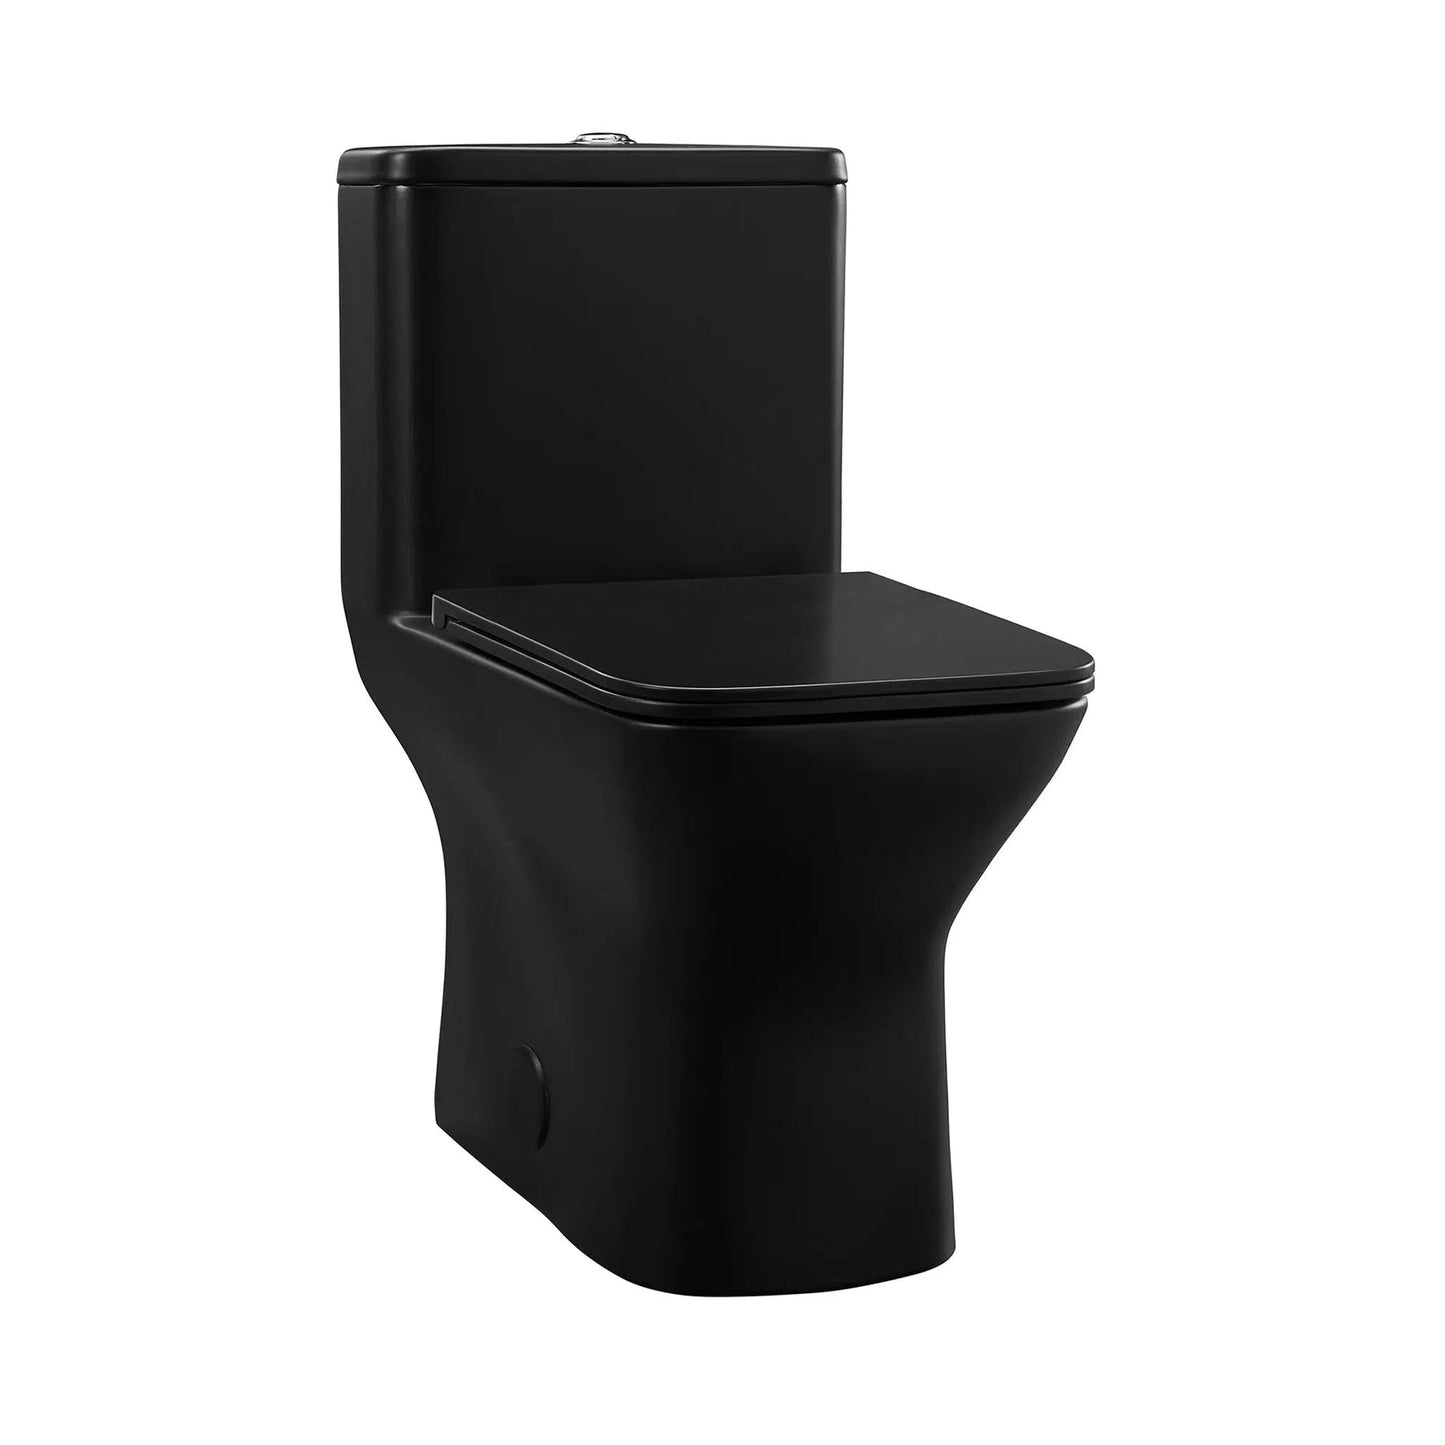 Swiss Madison Carré 15" x 30" One-Piece Matte Black Elongated Square Floor-Mounted Toilet With 1.1/1.6 GPF